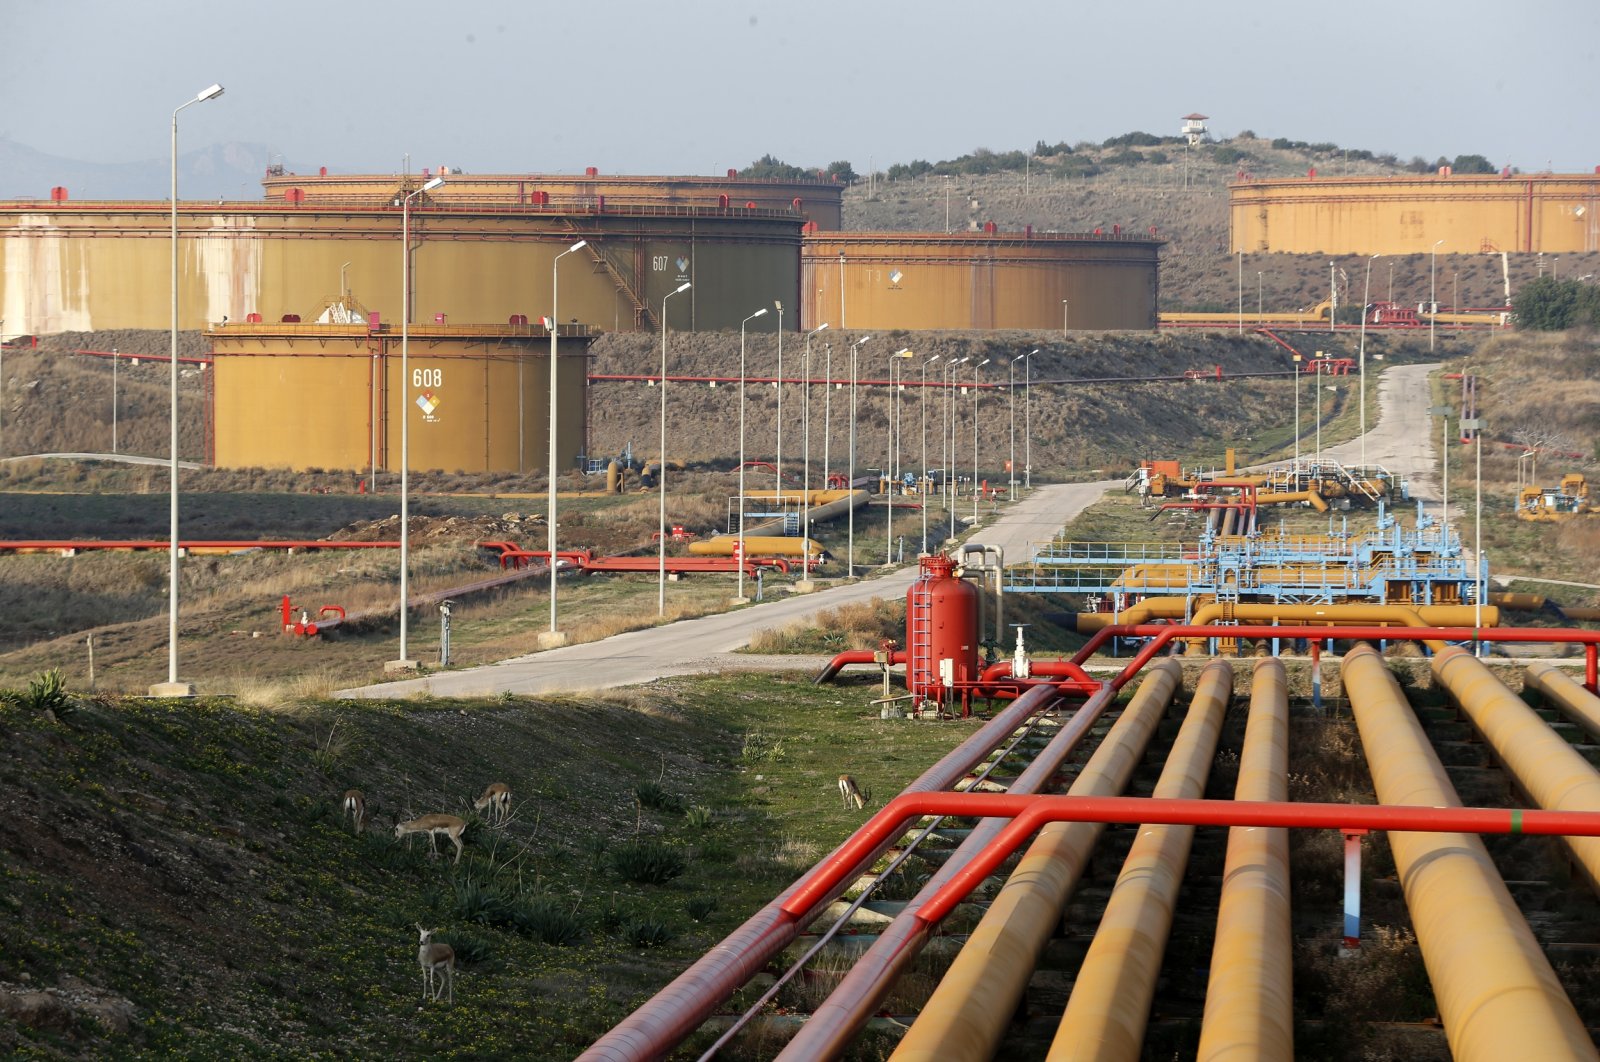 A general view of oil tanks at Turkey&#039;s Mediterranean port of Ceyhan, which is run by state-owned Petroleum Pipeline Corporation (BOTAŞ), some 70 km (43.5 miles) from Adana Feb. 19, 2014. (Reuters File Photo)